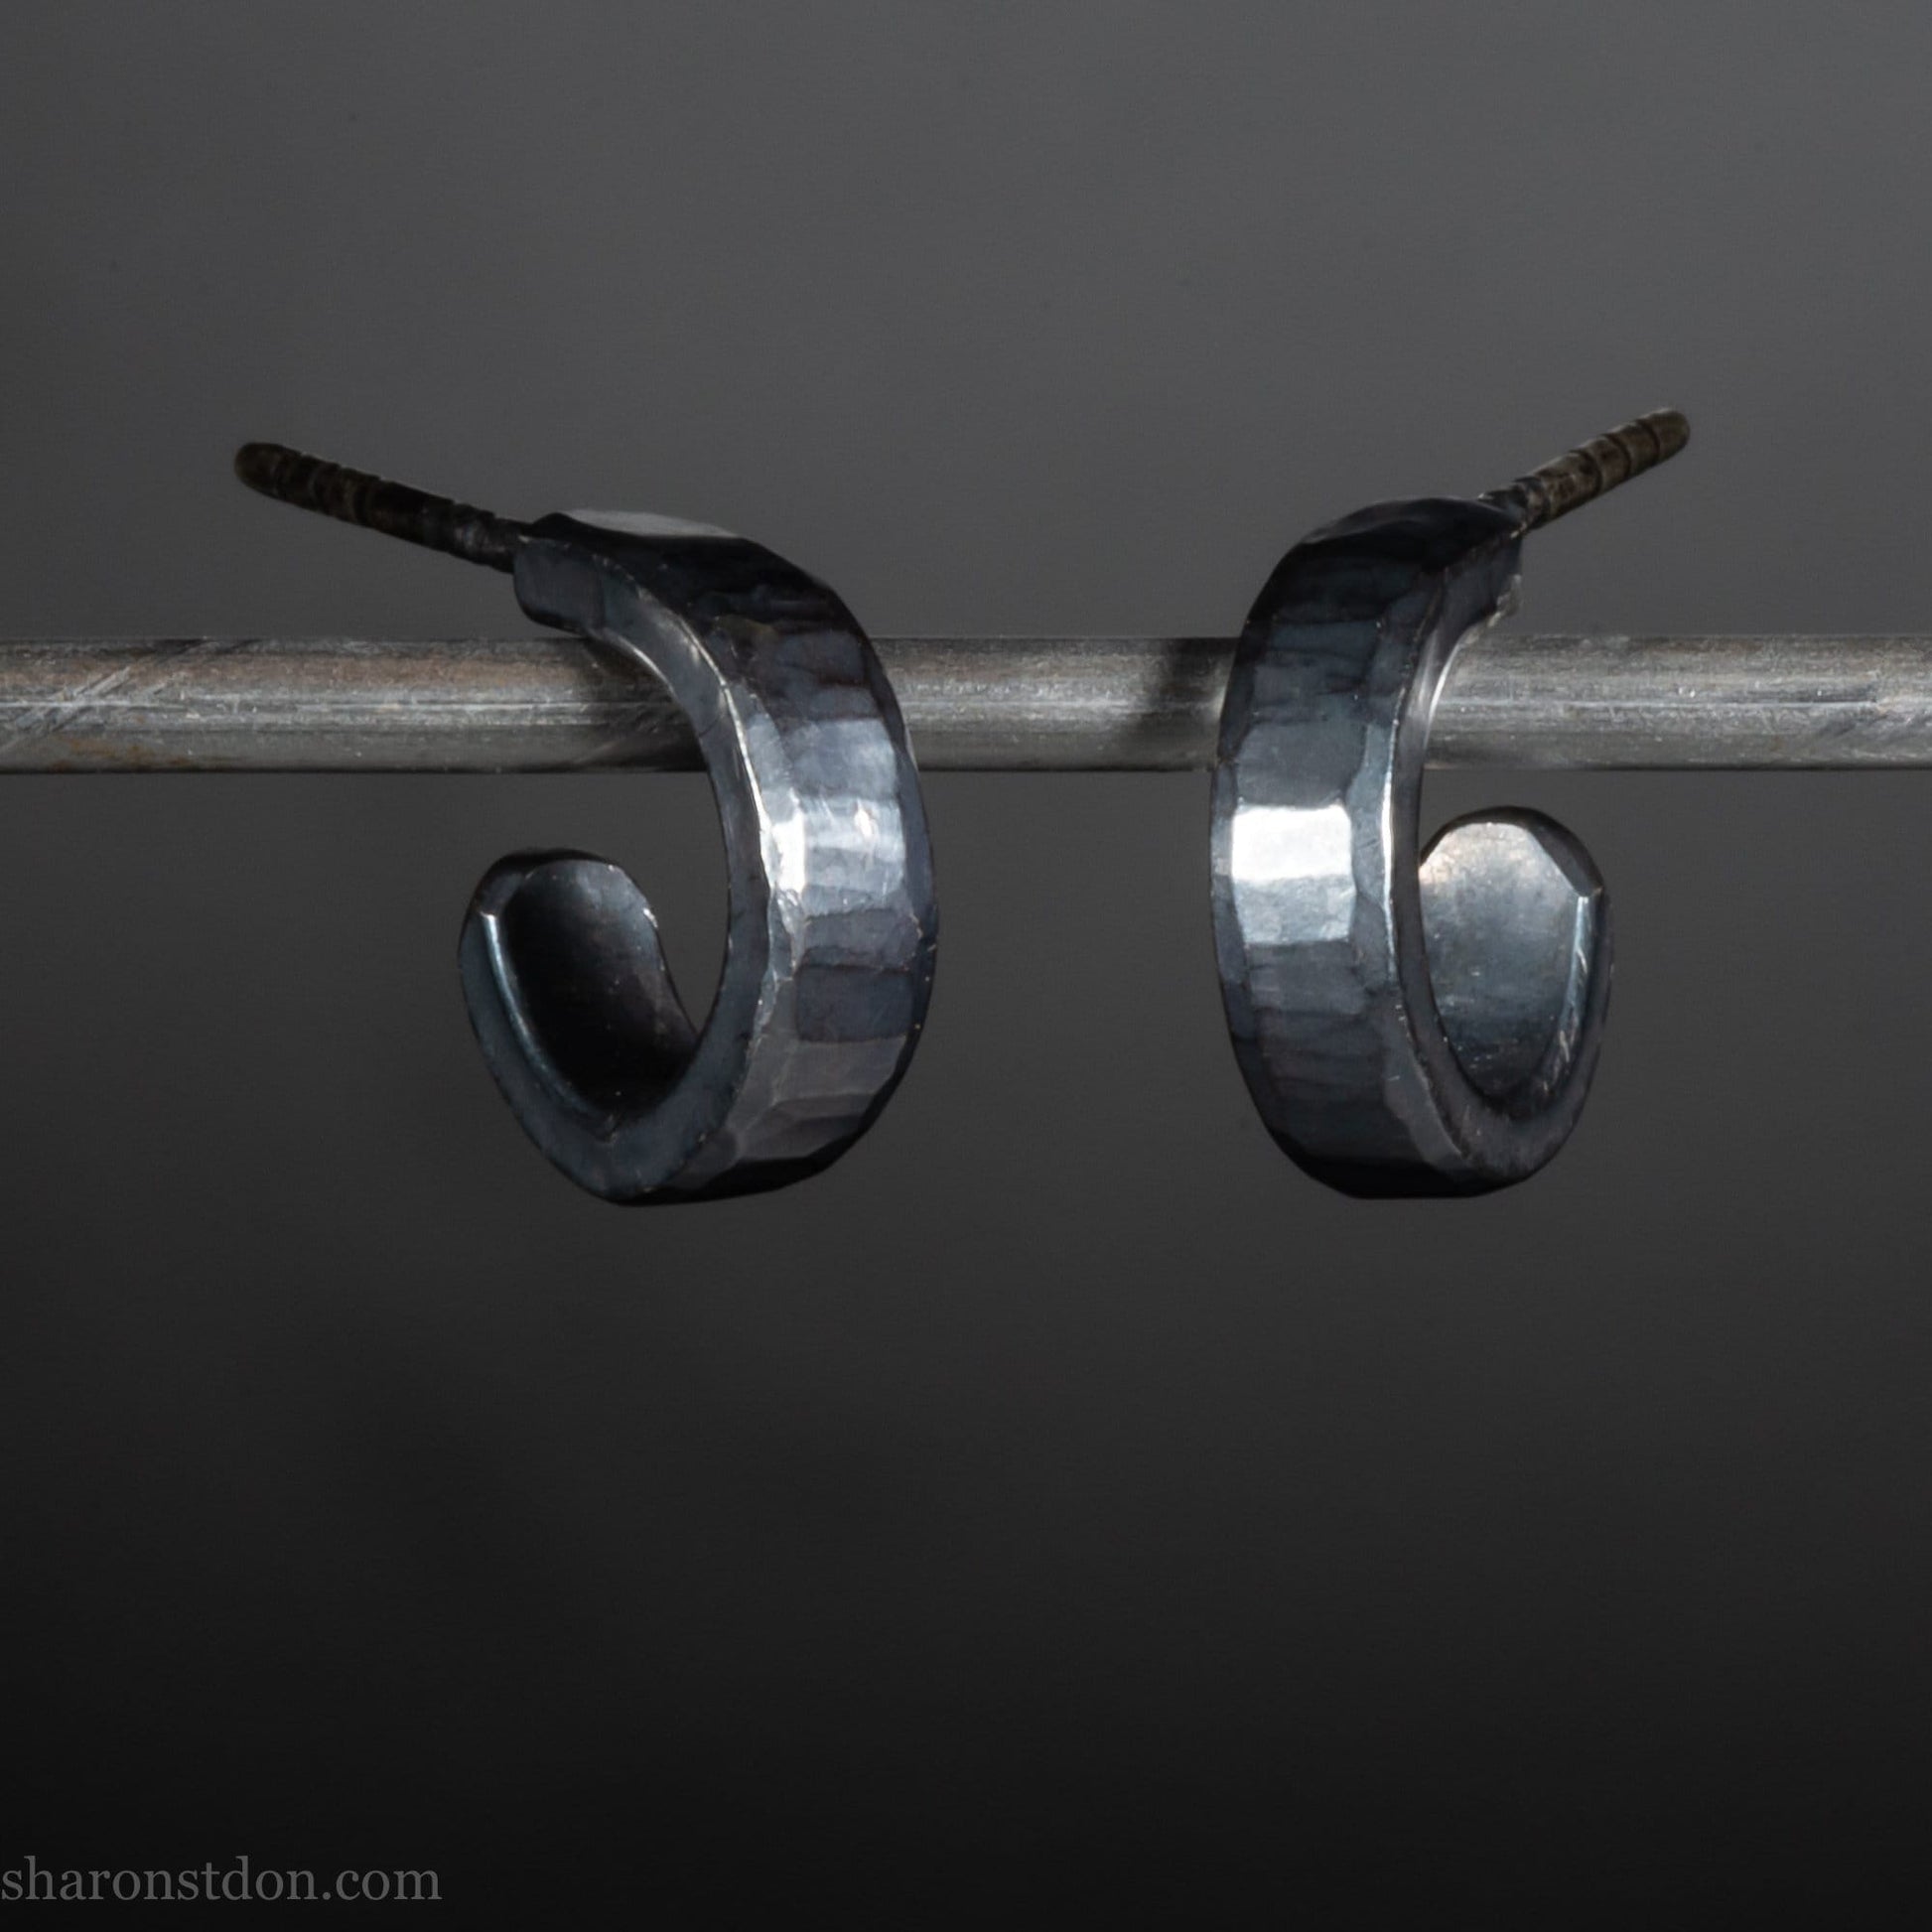 12mm x 3mm small sterling silver hoop earrings, Handmade in North America by Sharon SaintDon. Oxidized black, hammered texture, solid silver with silver posts and backs for men or women, unisex.